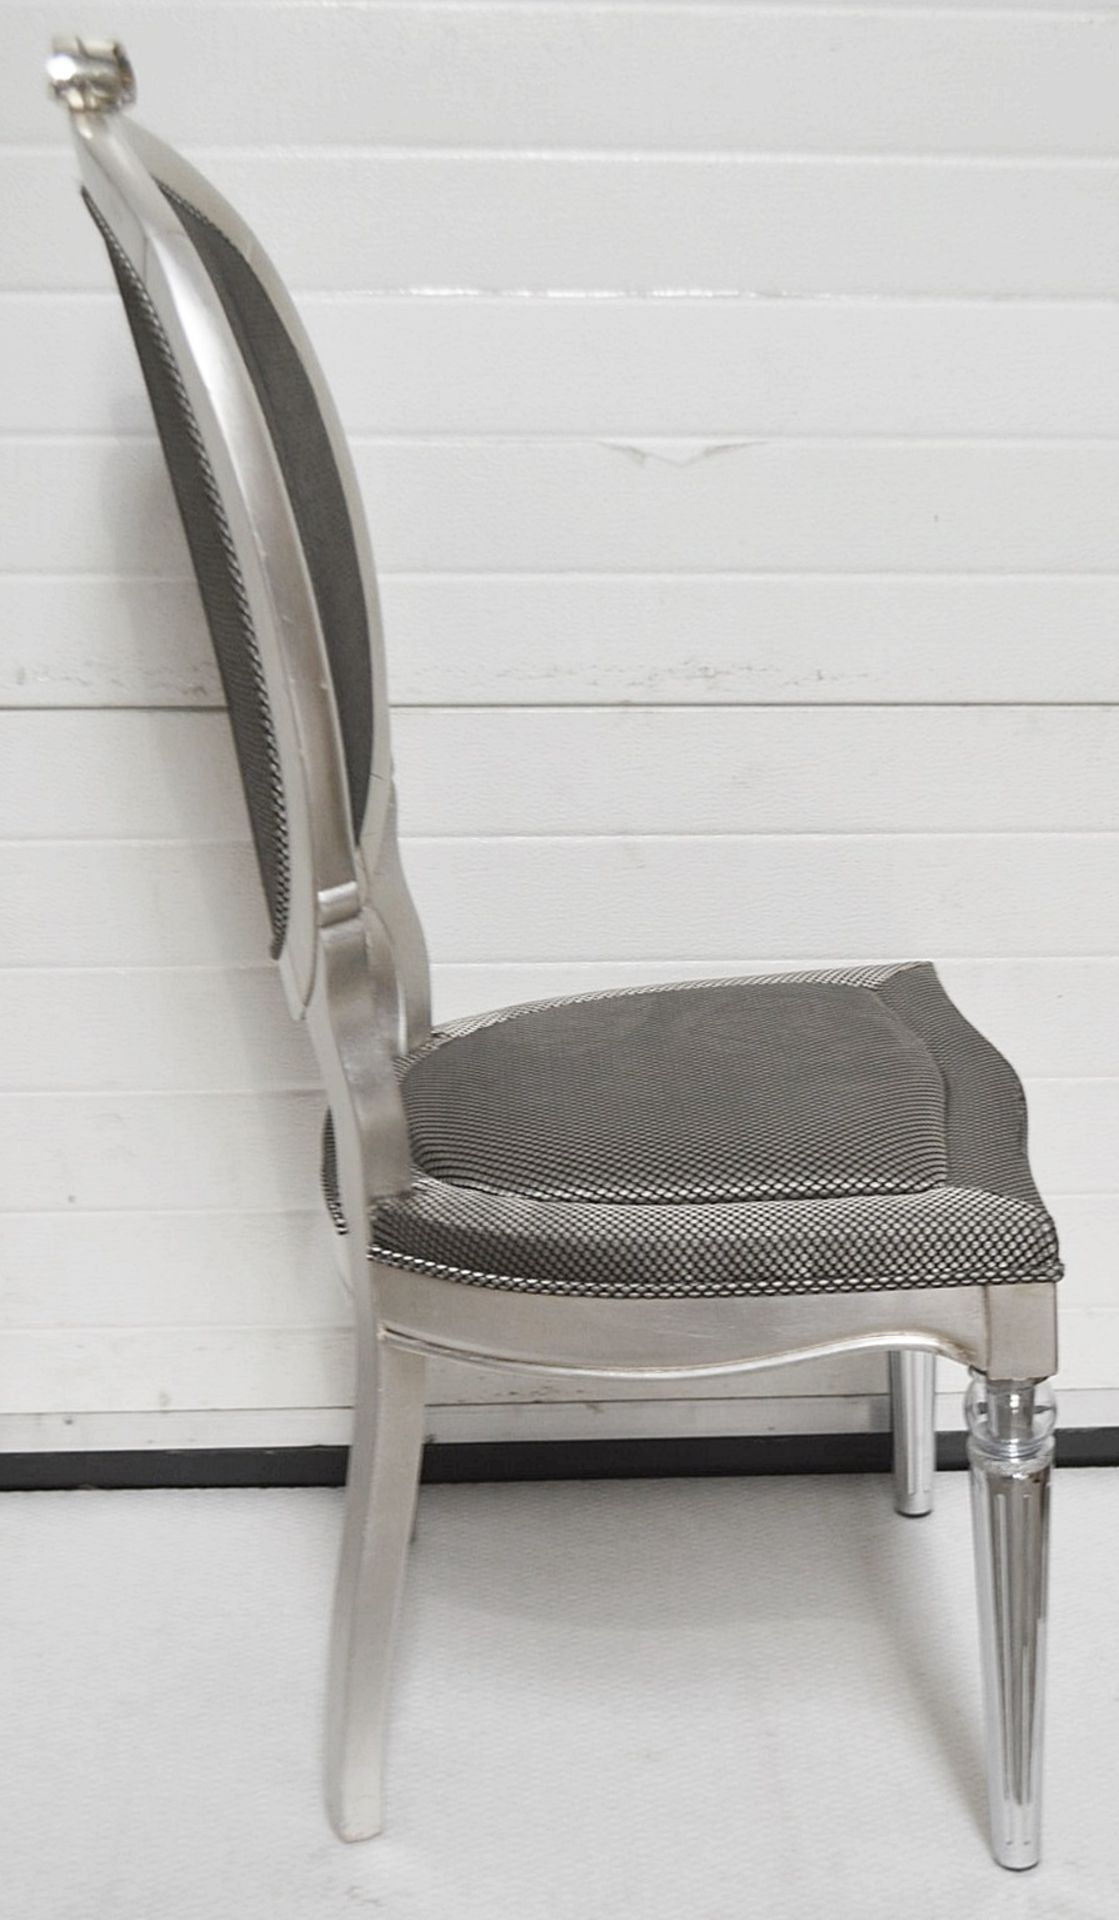 1 x Luxurious Designer Chair In Silver With Upholstered Seat And Ornate Legs - Dimensions: H72 x - Image 3 of 12